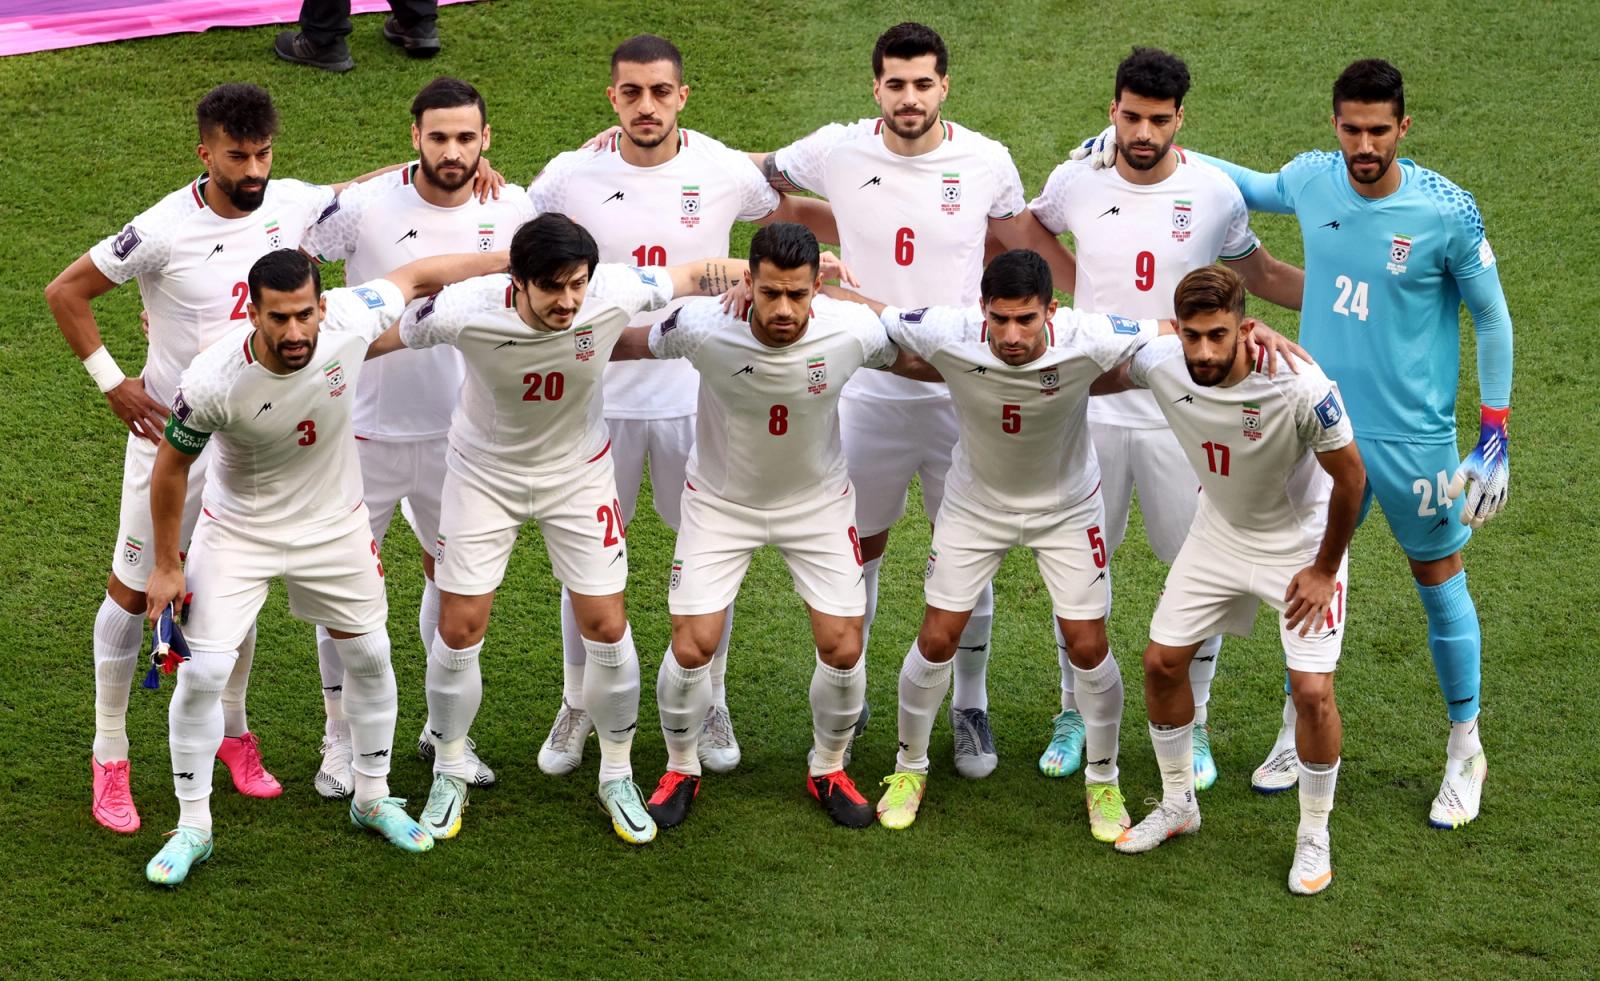 Iran players pose for a team group photo before the match